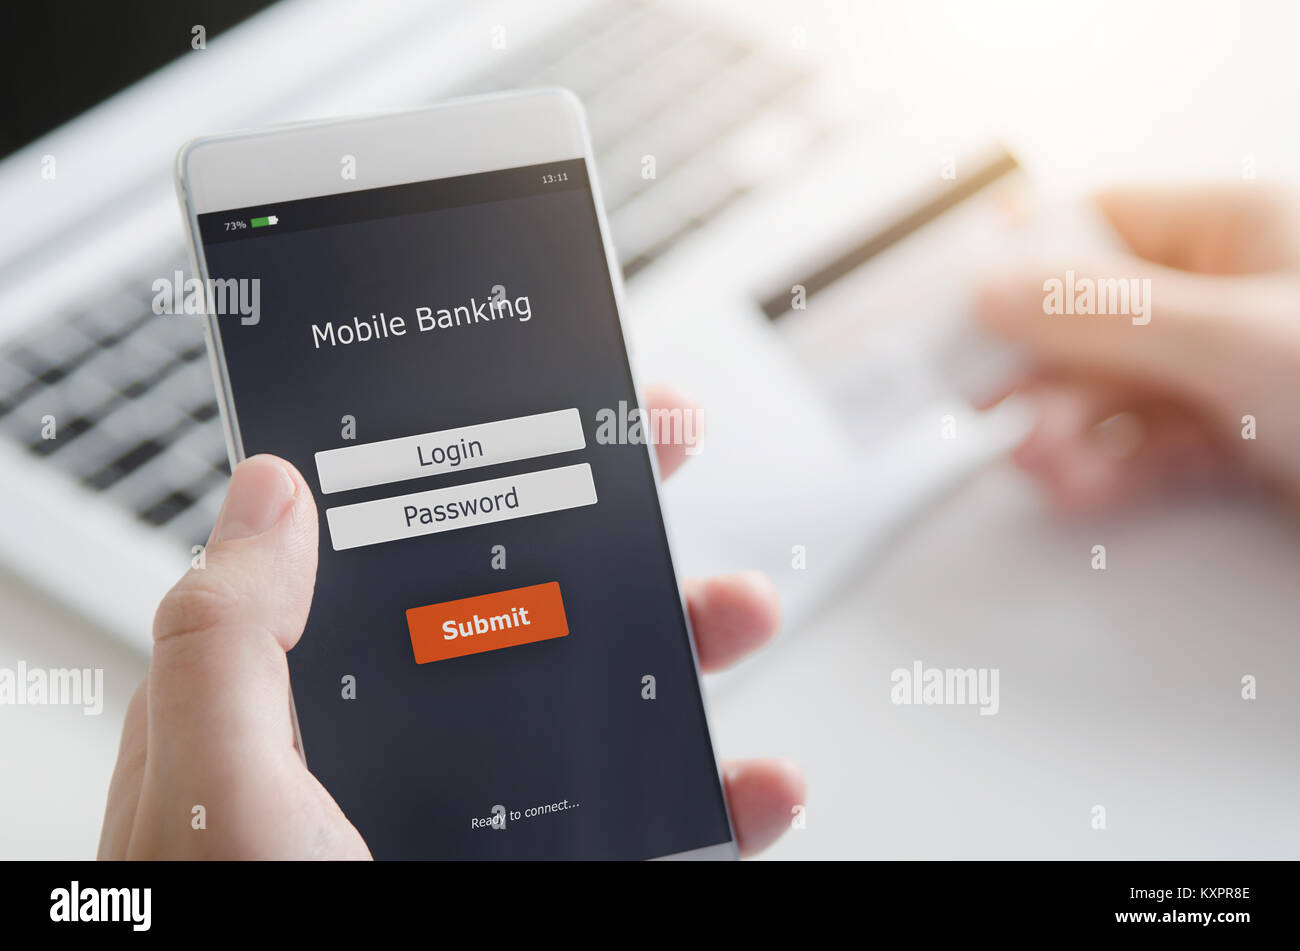 Login to mobile banking account on smart phone. Making payment by mobile application. Stock Photo